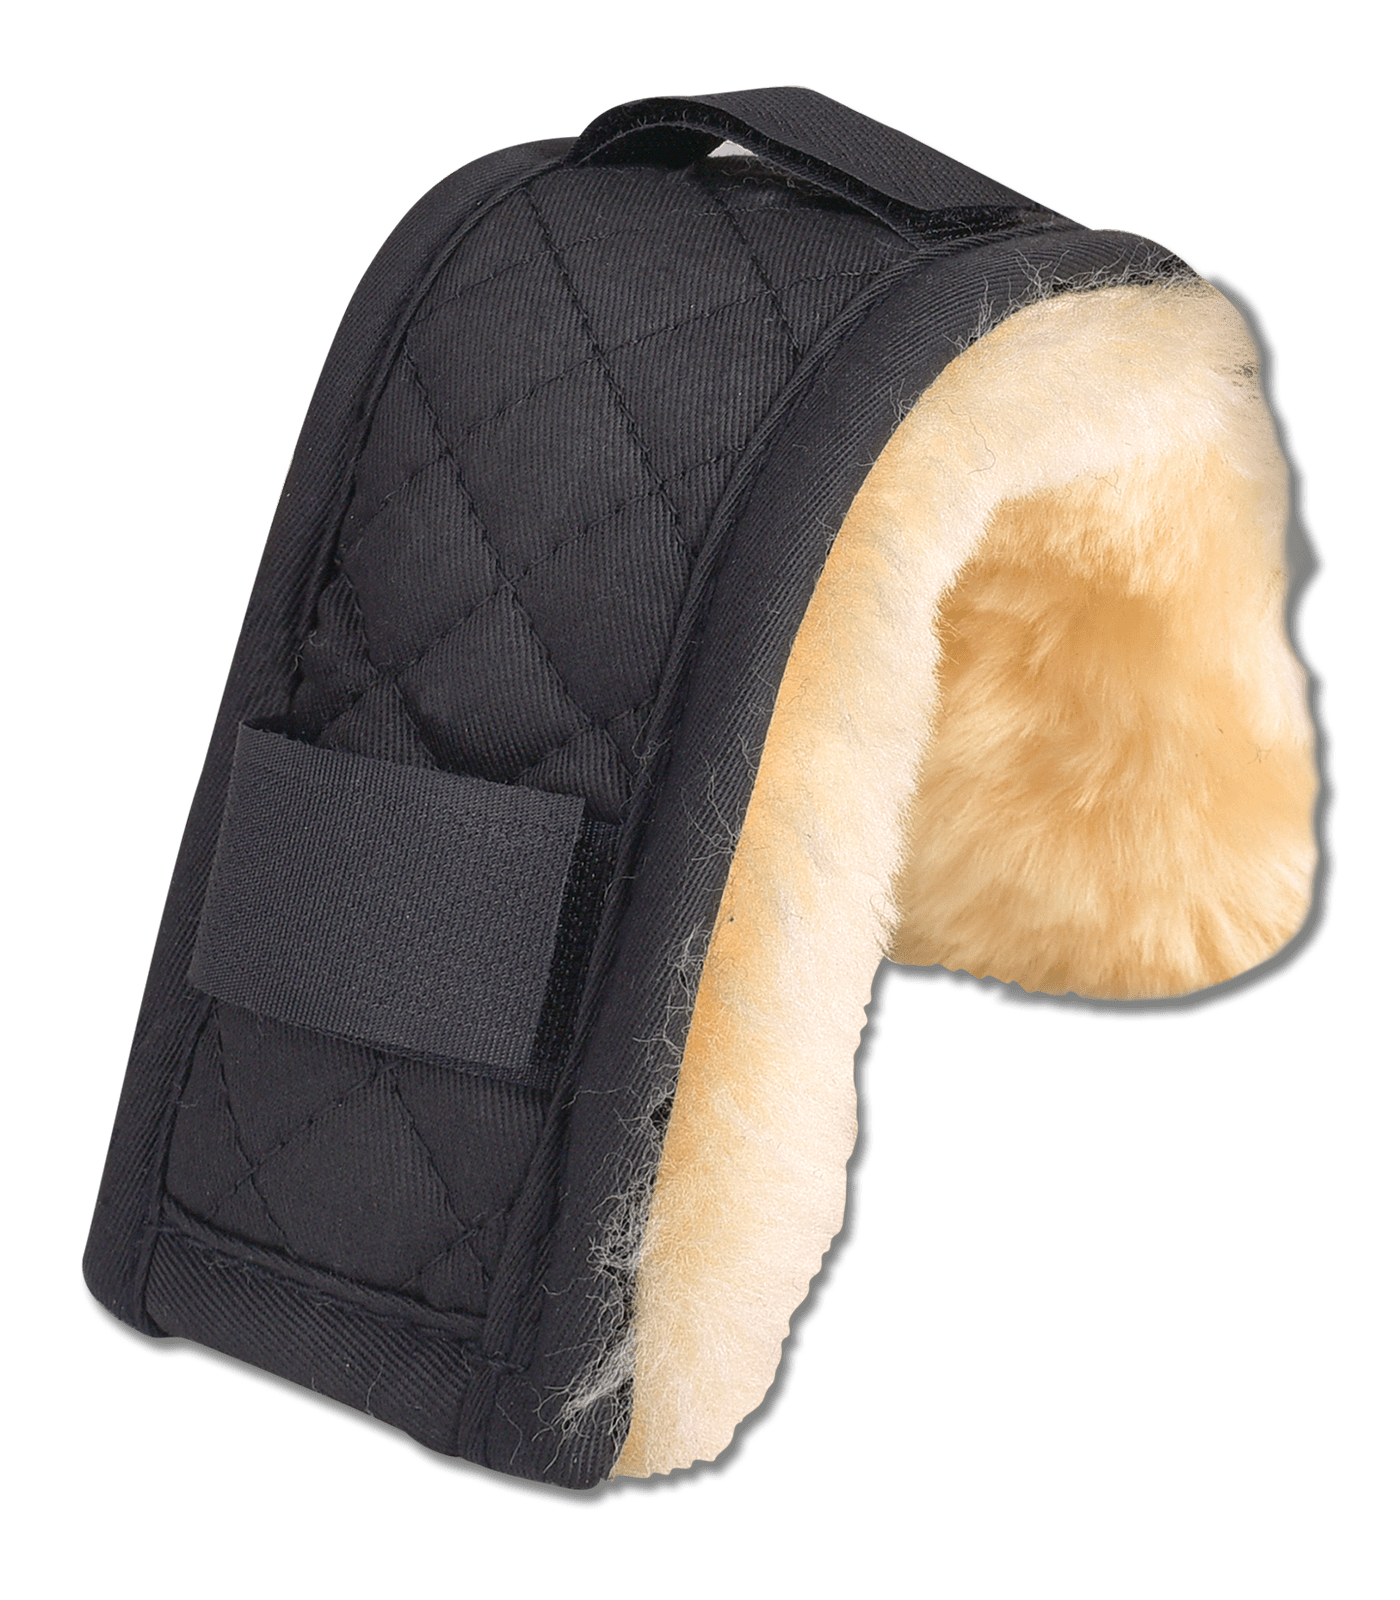 Lambskin Nose Or Chin Protector,18cm